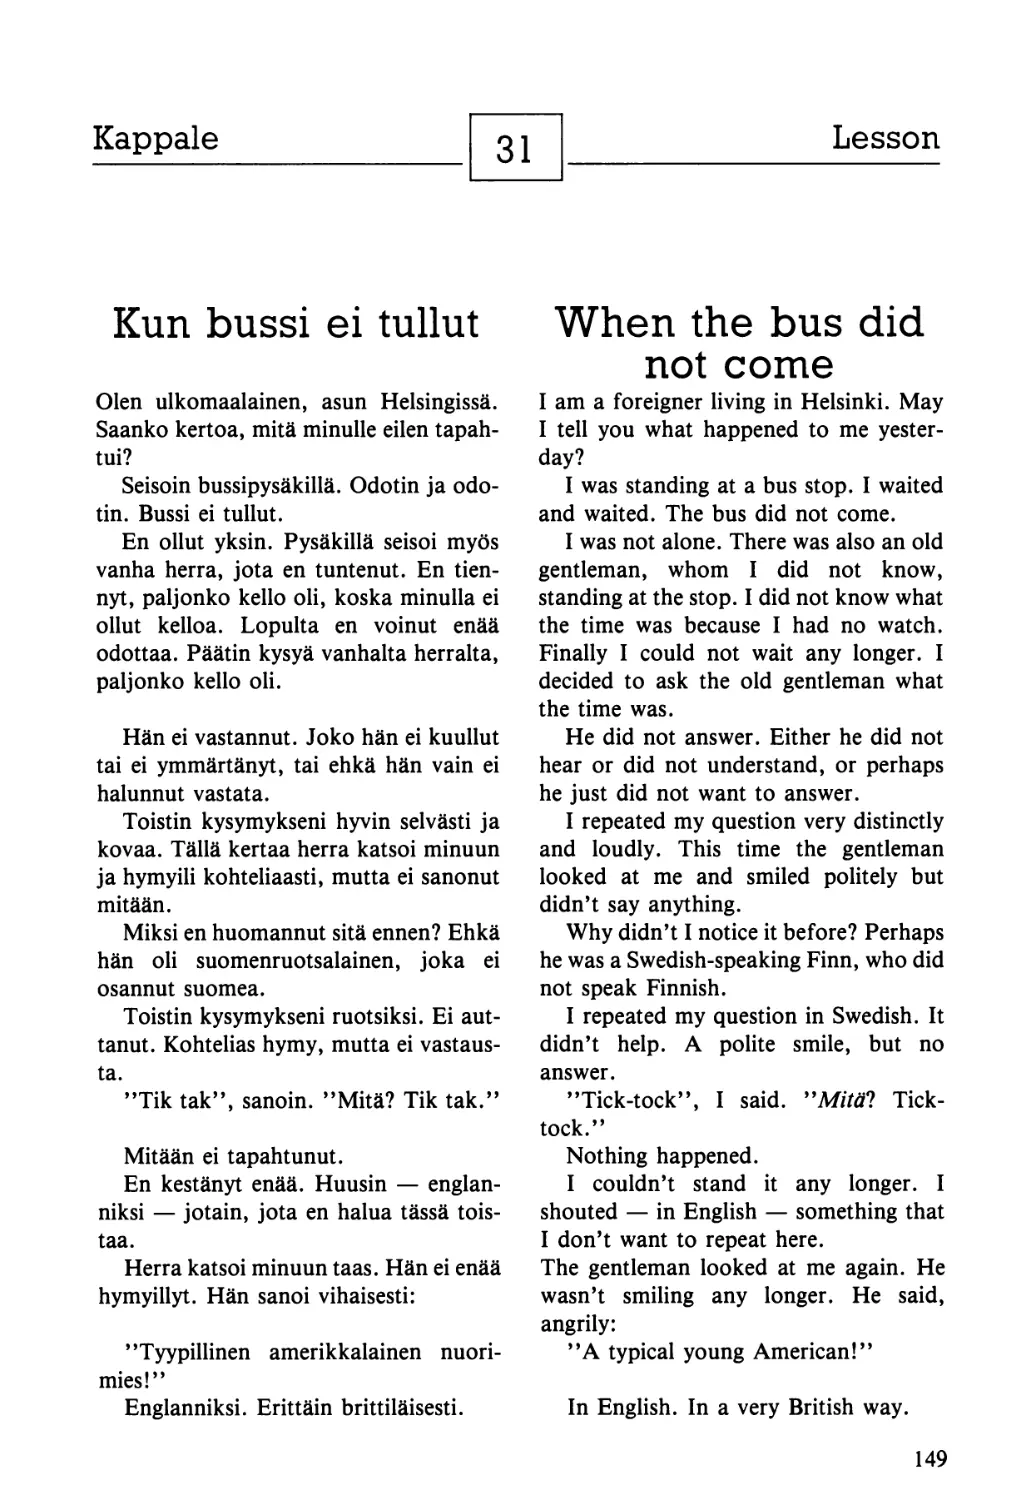 31. Kun bussi ei tullut — When the bus did not come